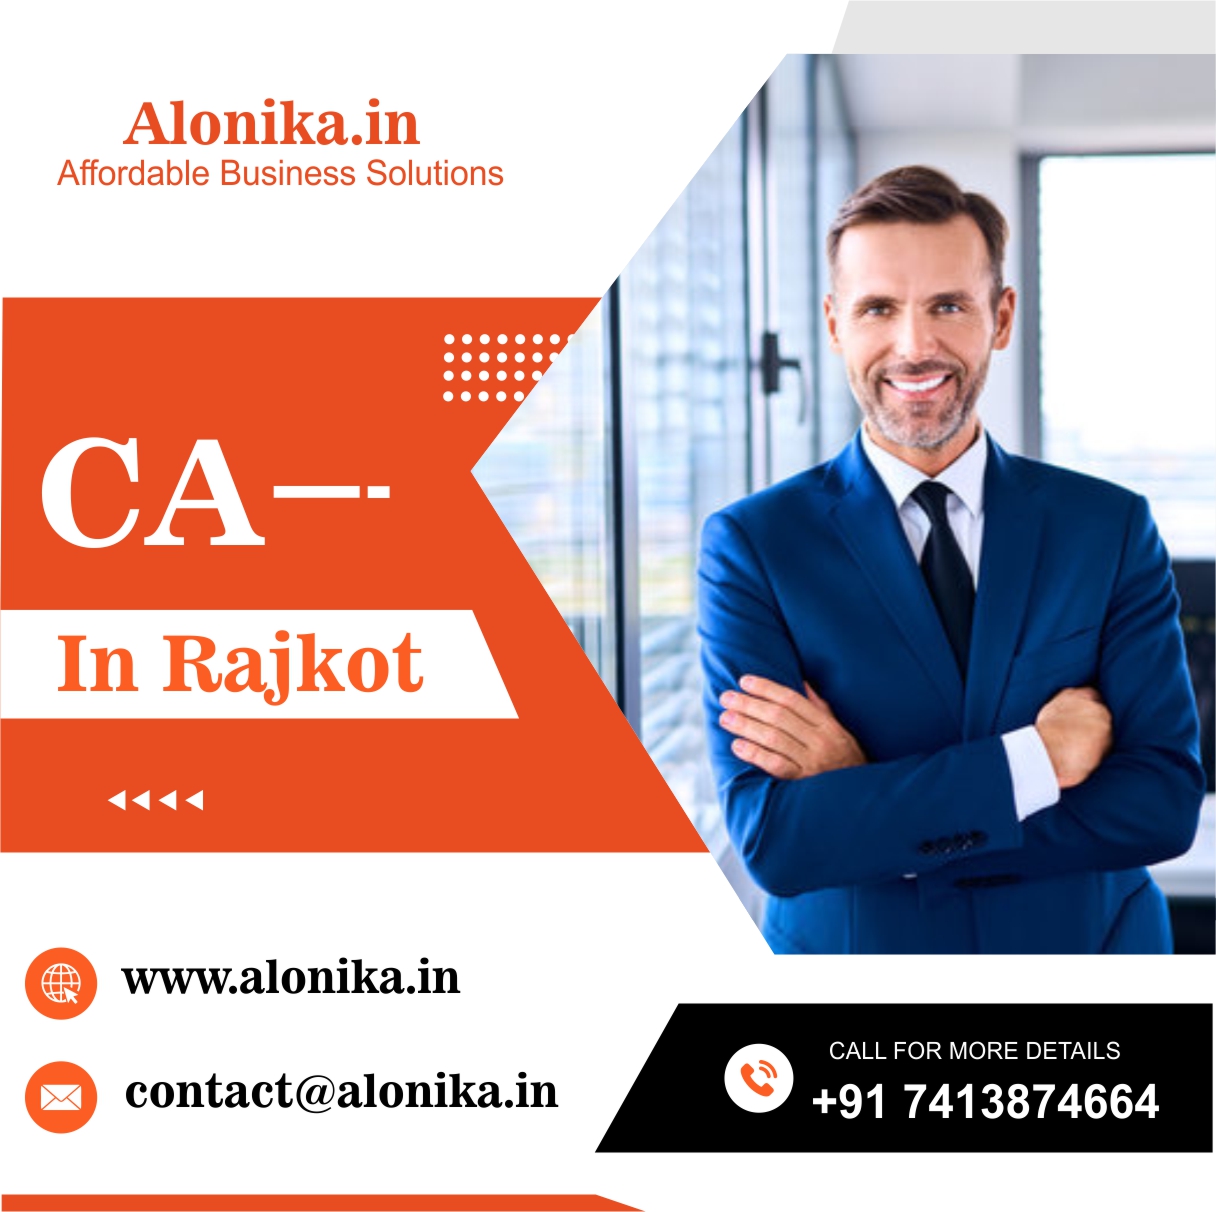 How can I find a qualified and experienced CA in RAJKOT for my financial needs?